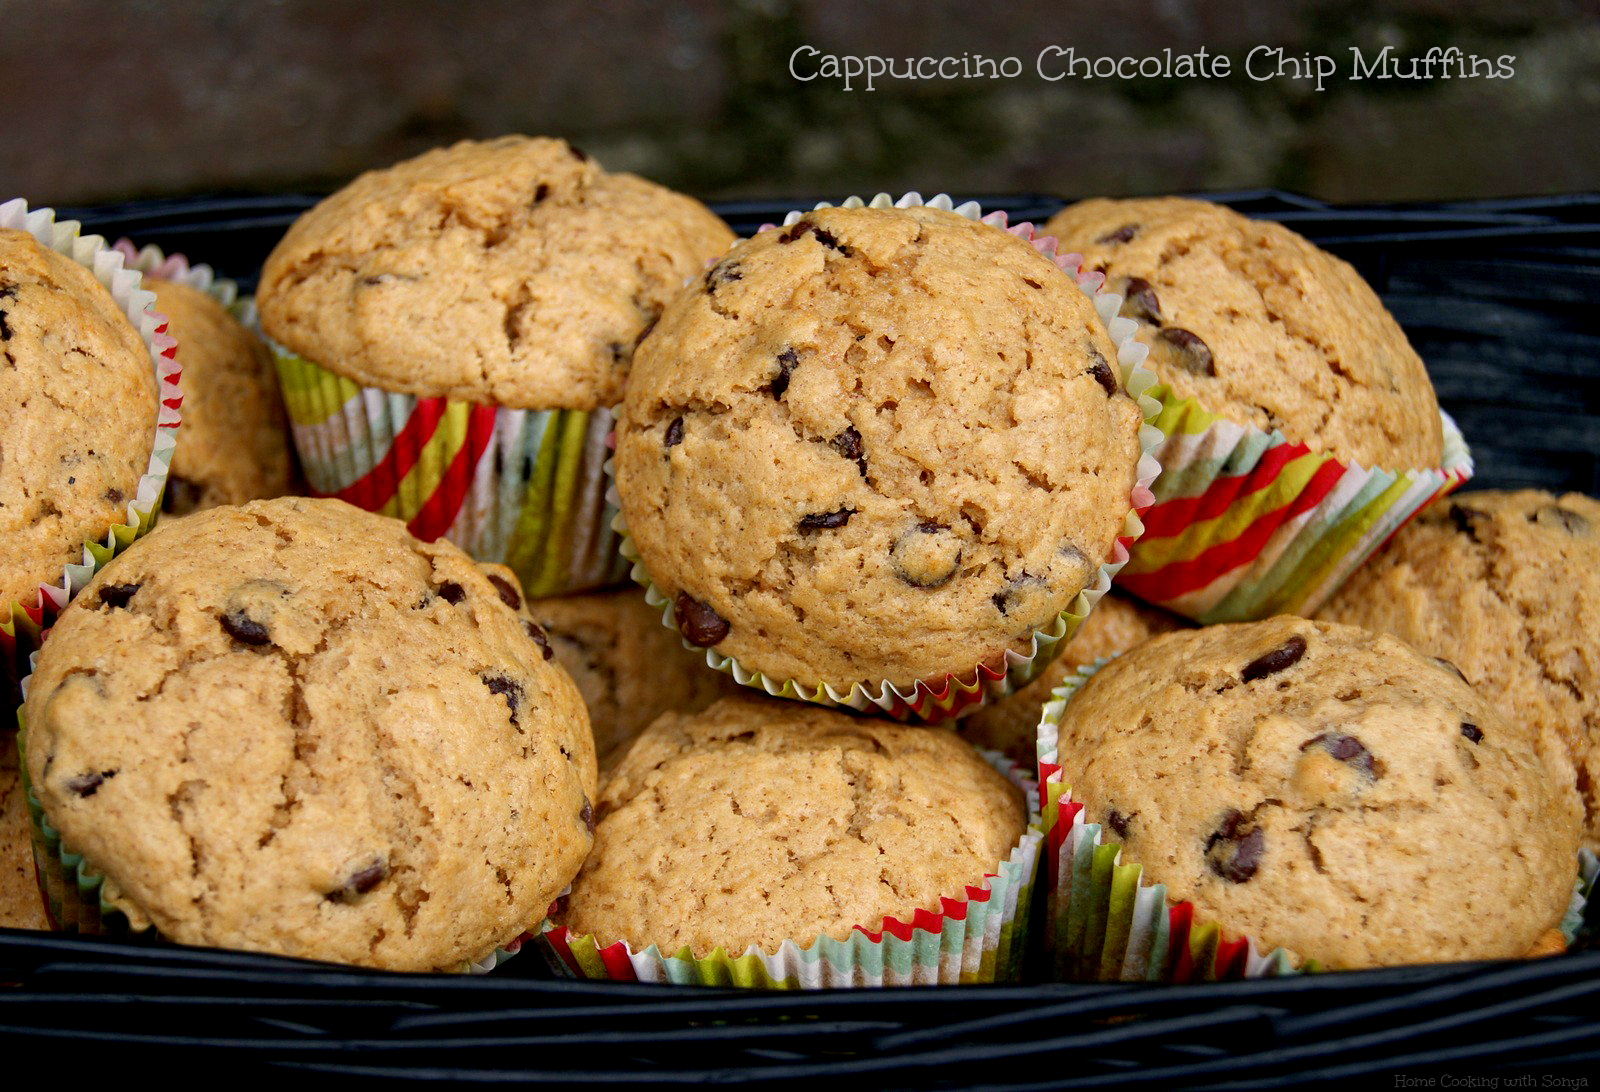 Home Cooking with Sonya: Cappuccino Chocolate Chip Muffins